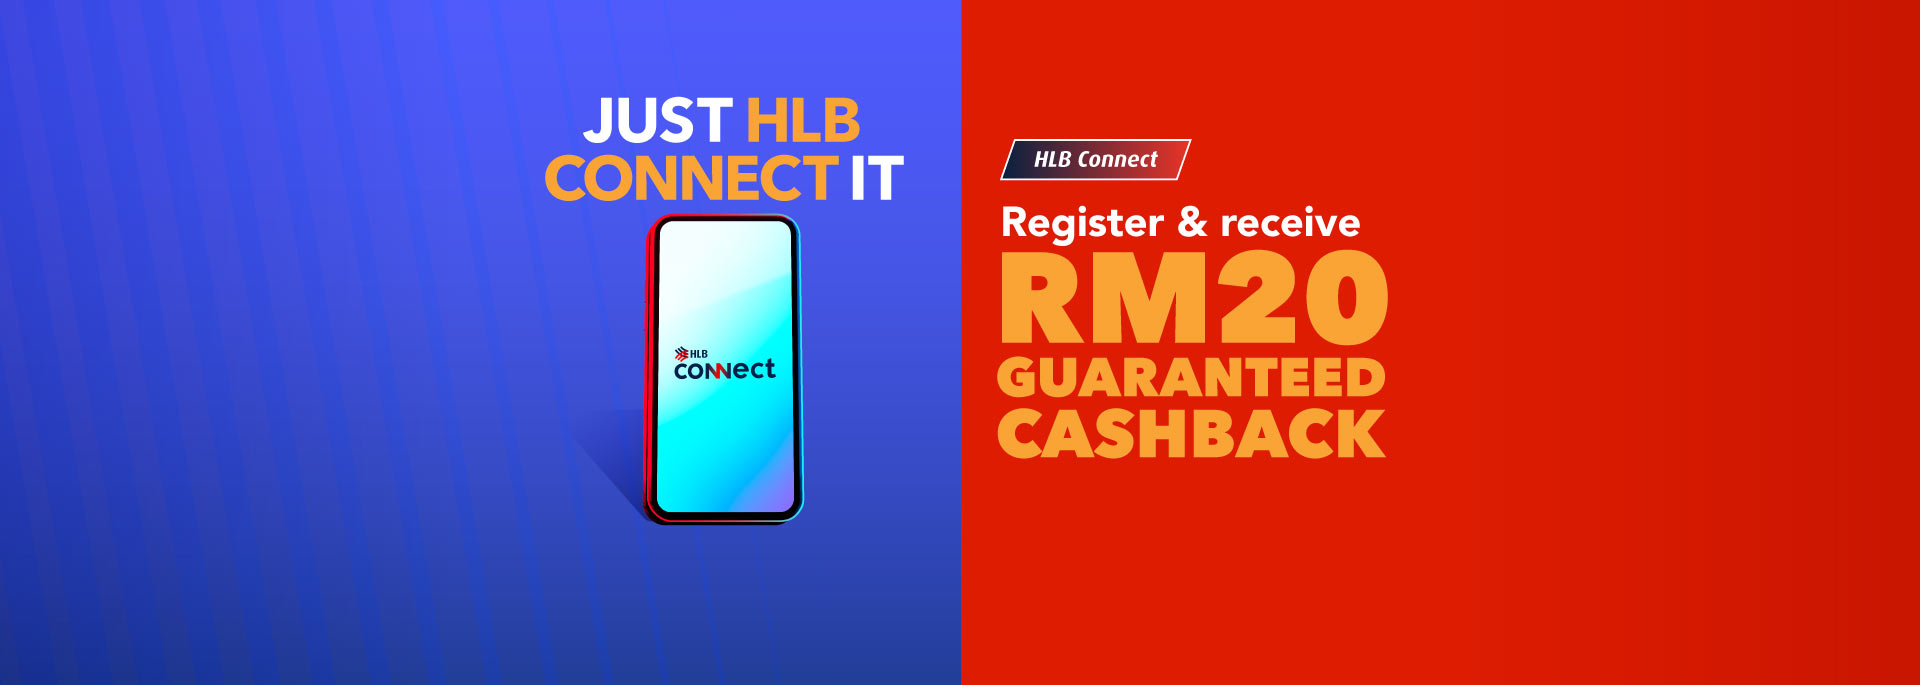 Register for HLB Connect & receive RM20 Guaranteed Cashback